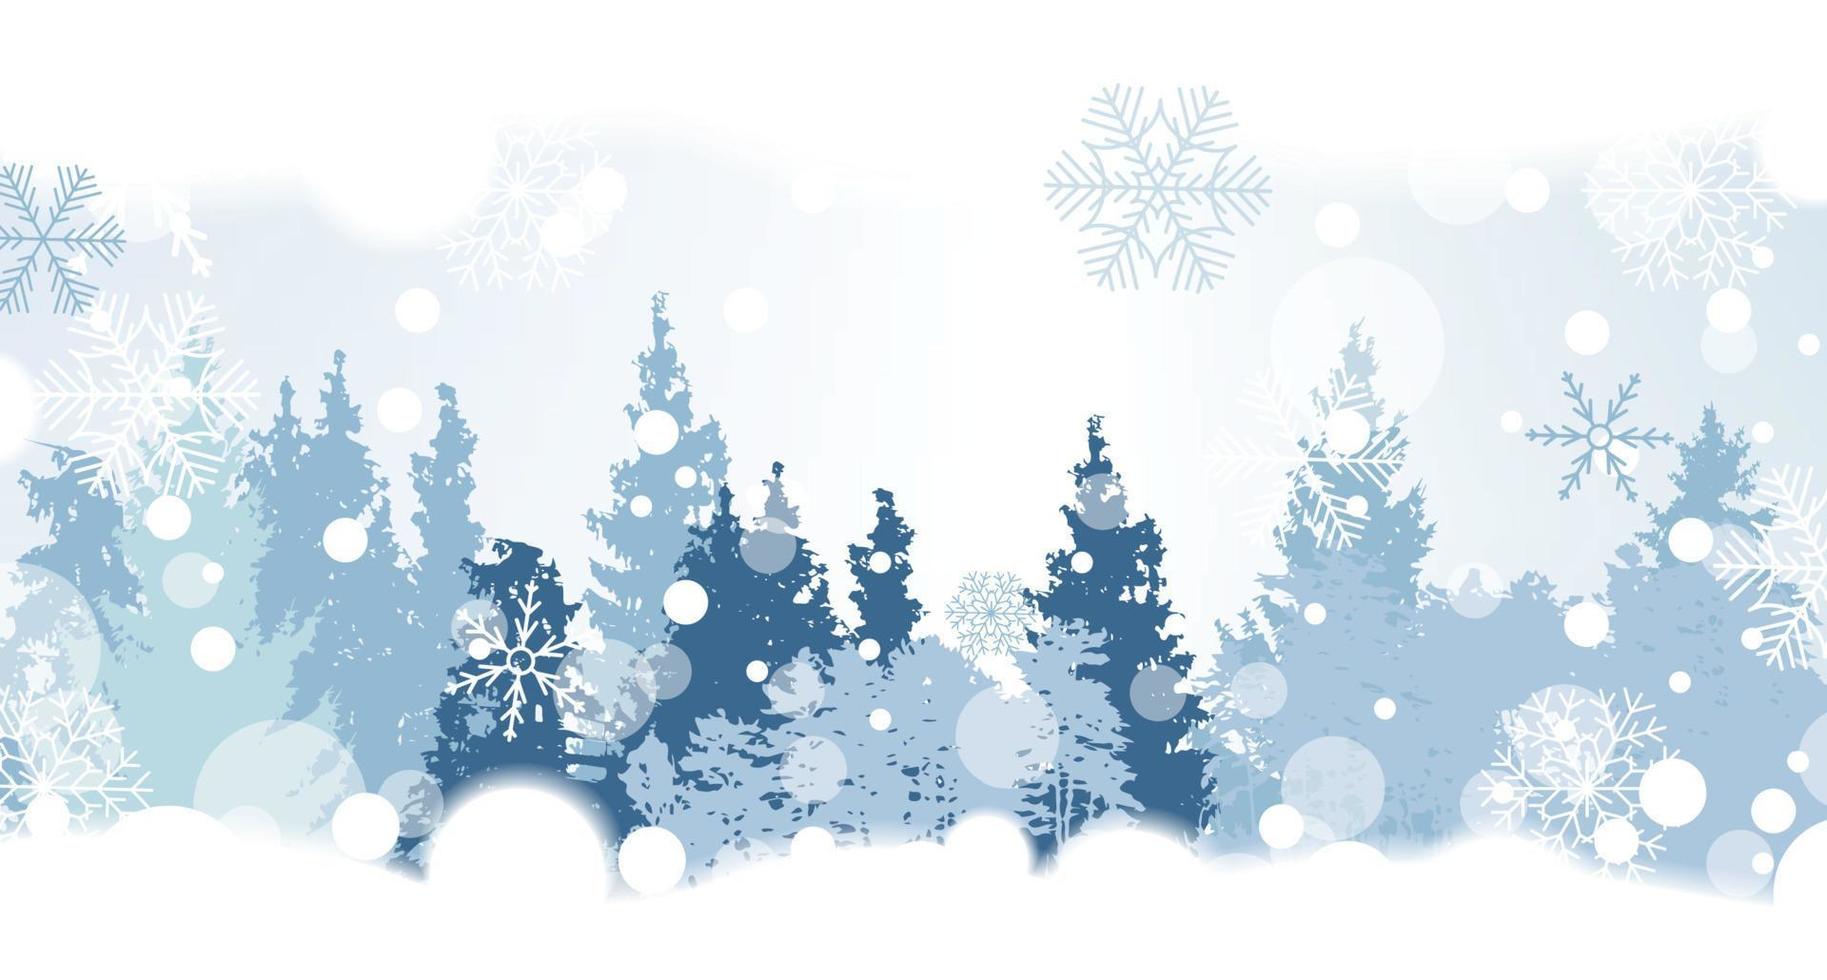 Christmas Snowflakes on Background with a silhouette of trees. Vector Illustration.